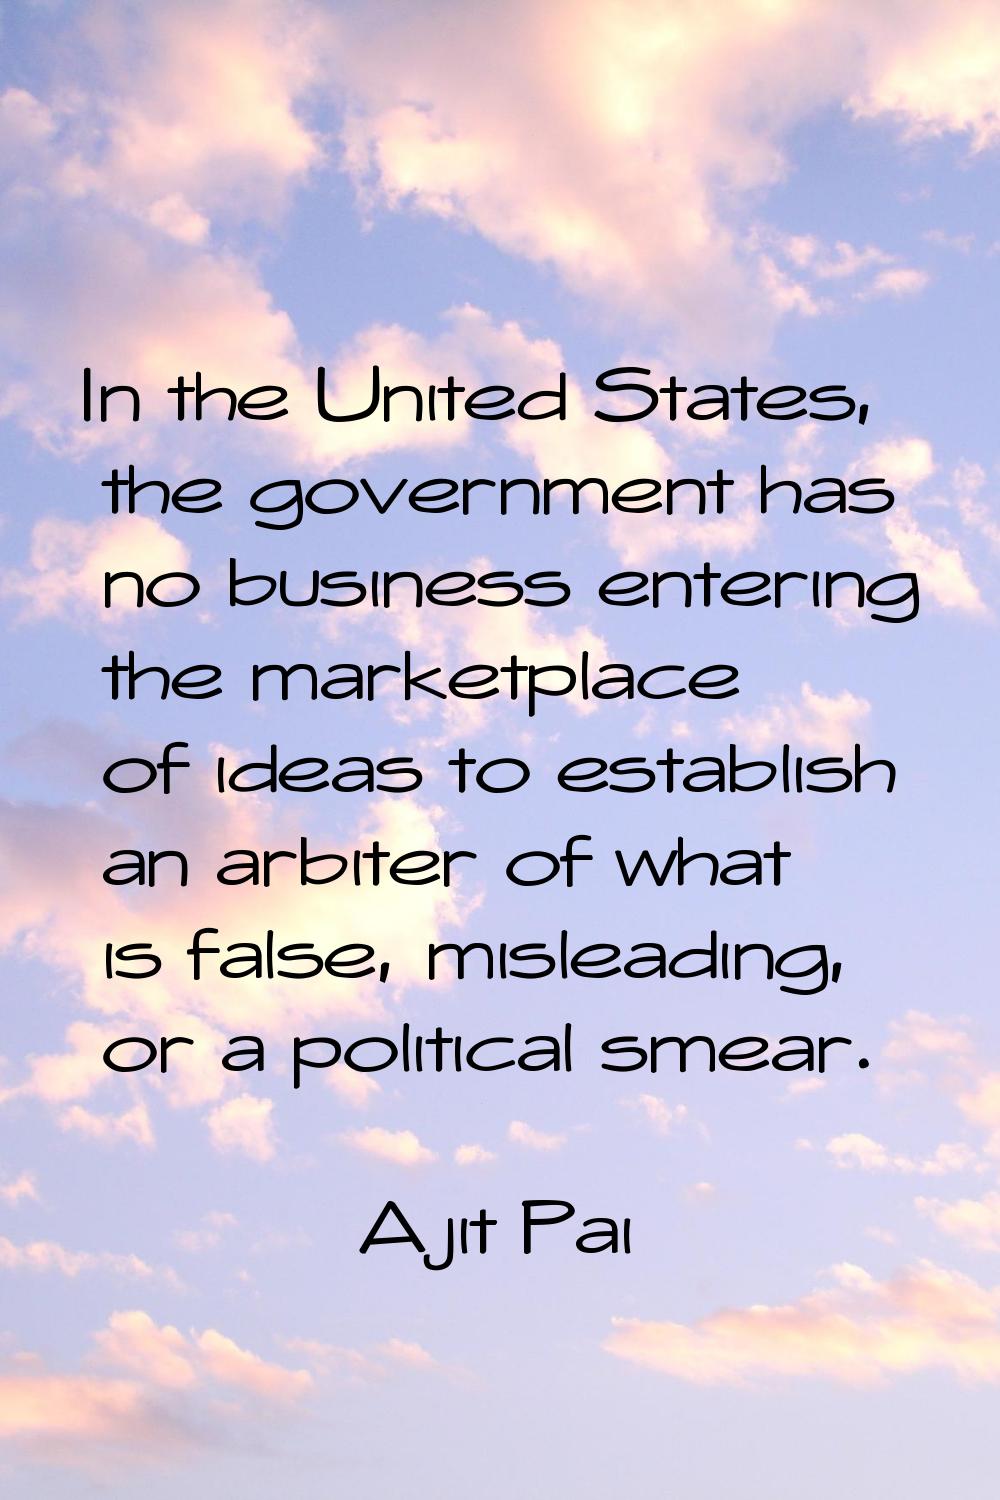 In the United States, the government has no business entering the marketplace of ideas to establish